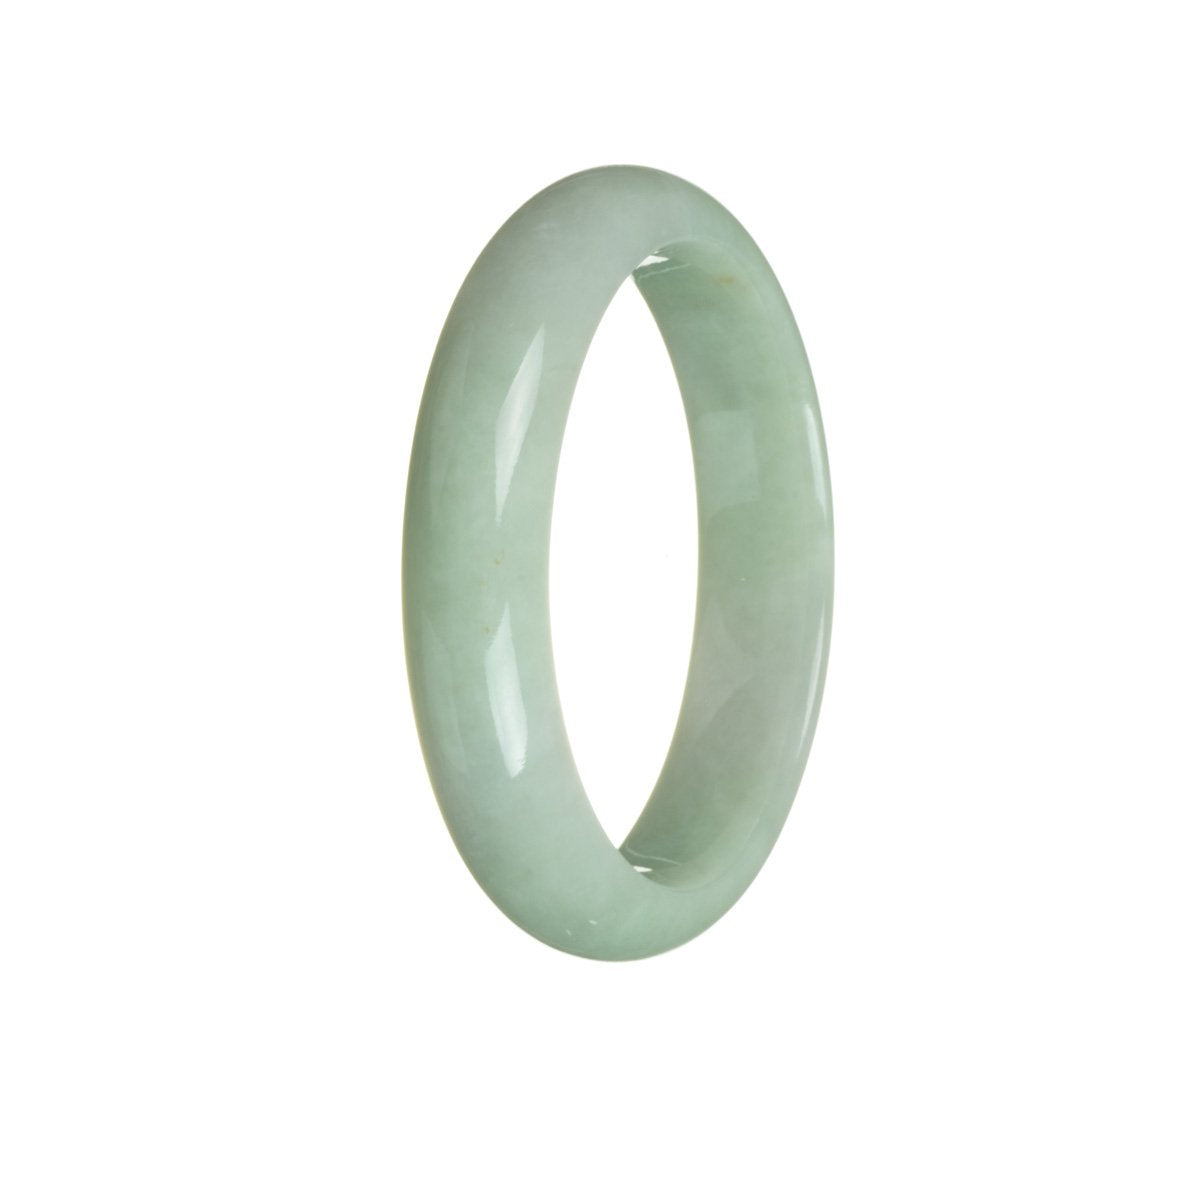 A beautiful green jade bracelet in a half moon shape, showcasing its natural beauty and elegance.